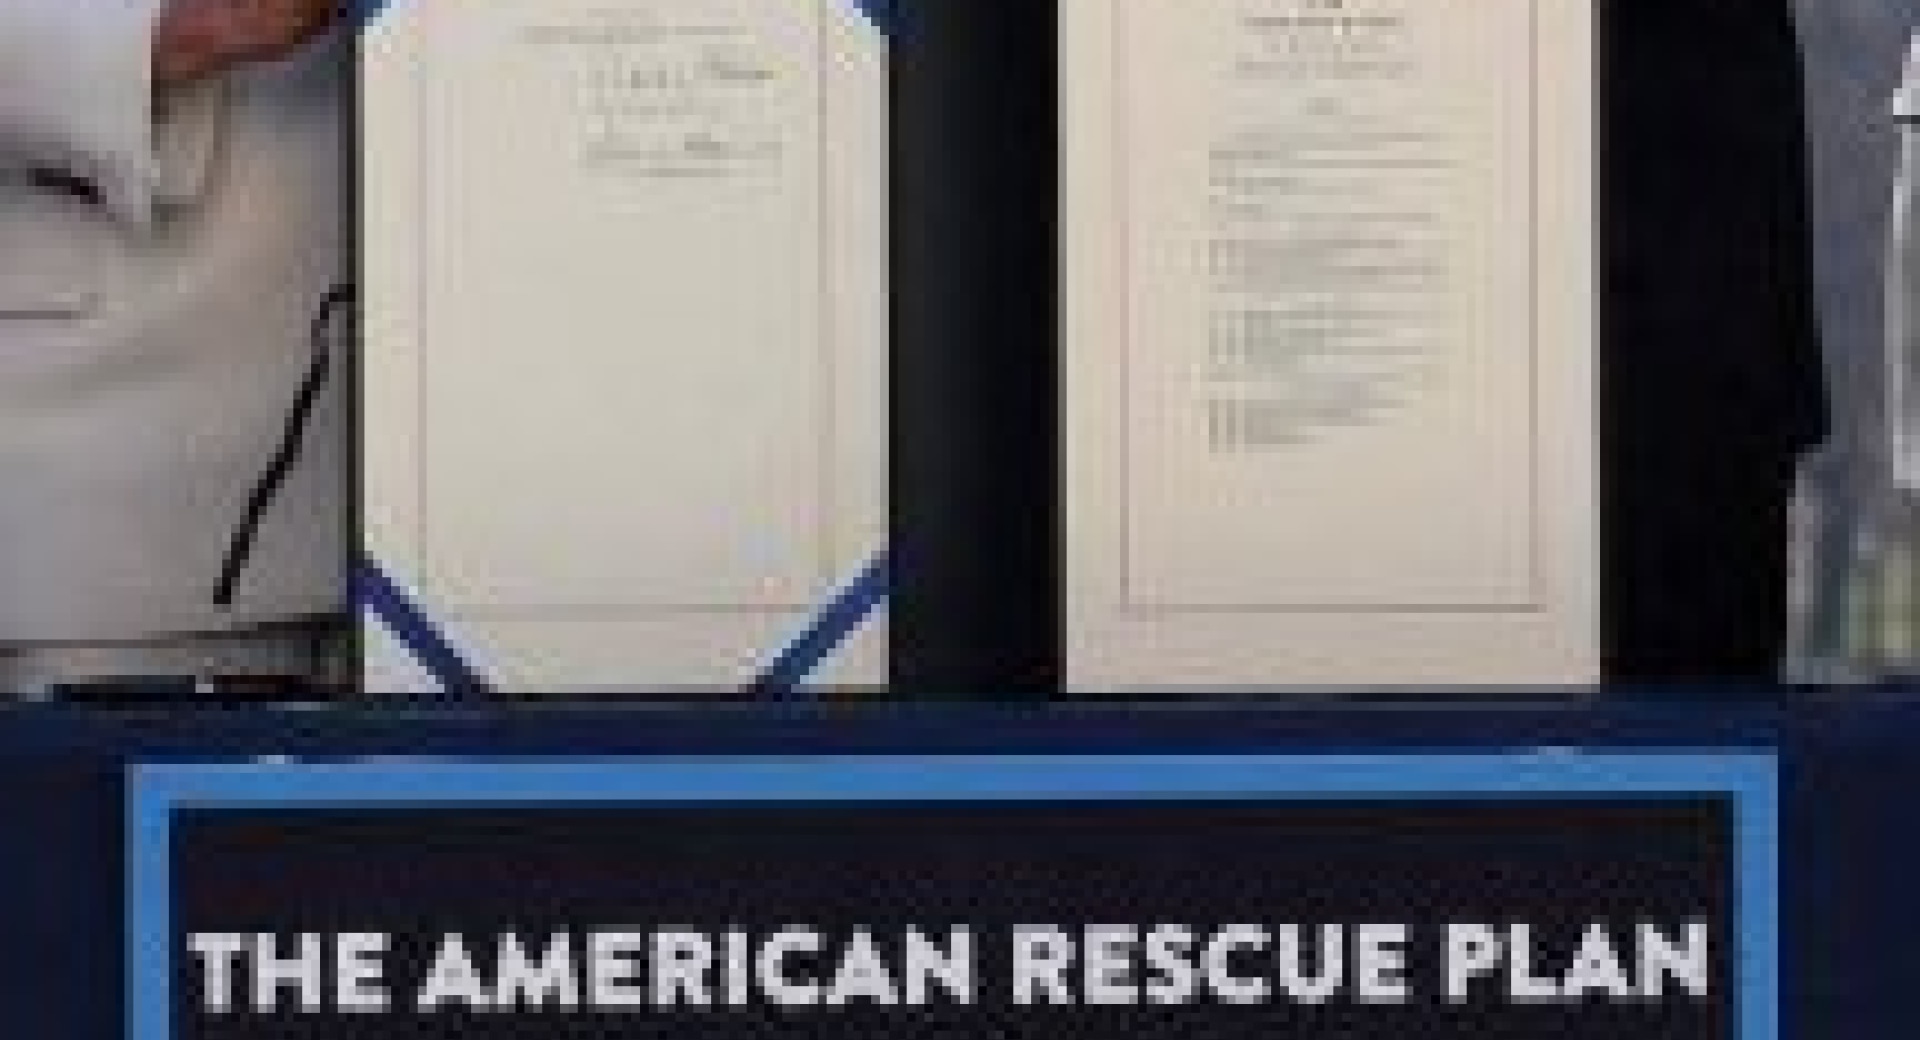 American Rescue Plan supports Minnesota's communities most in need